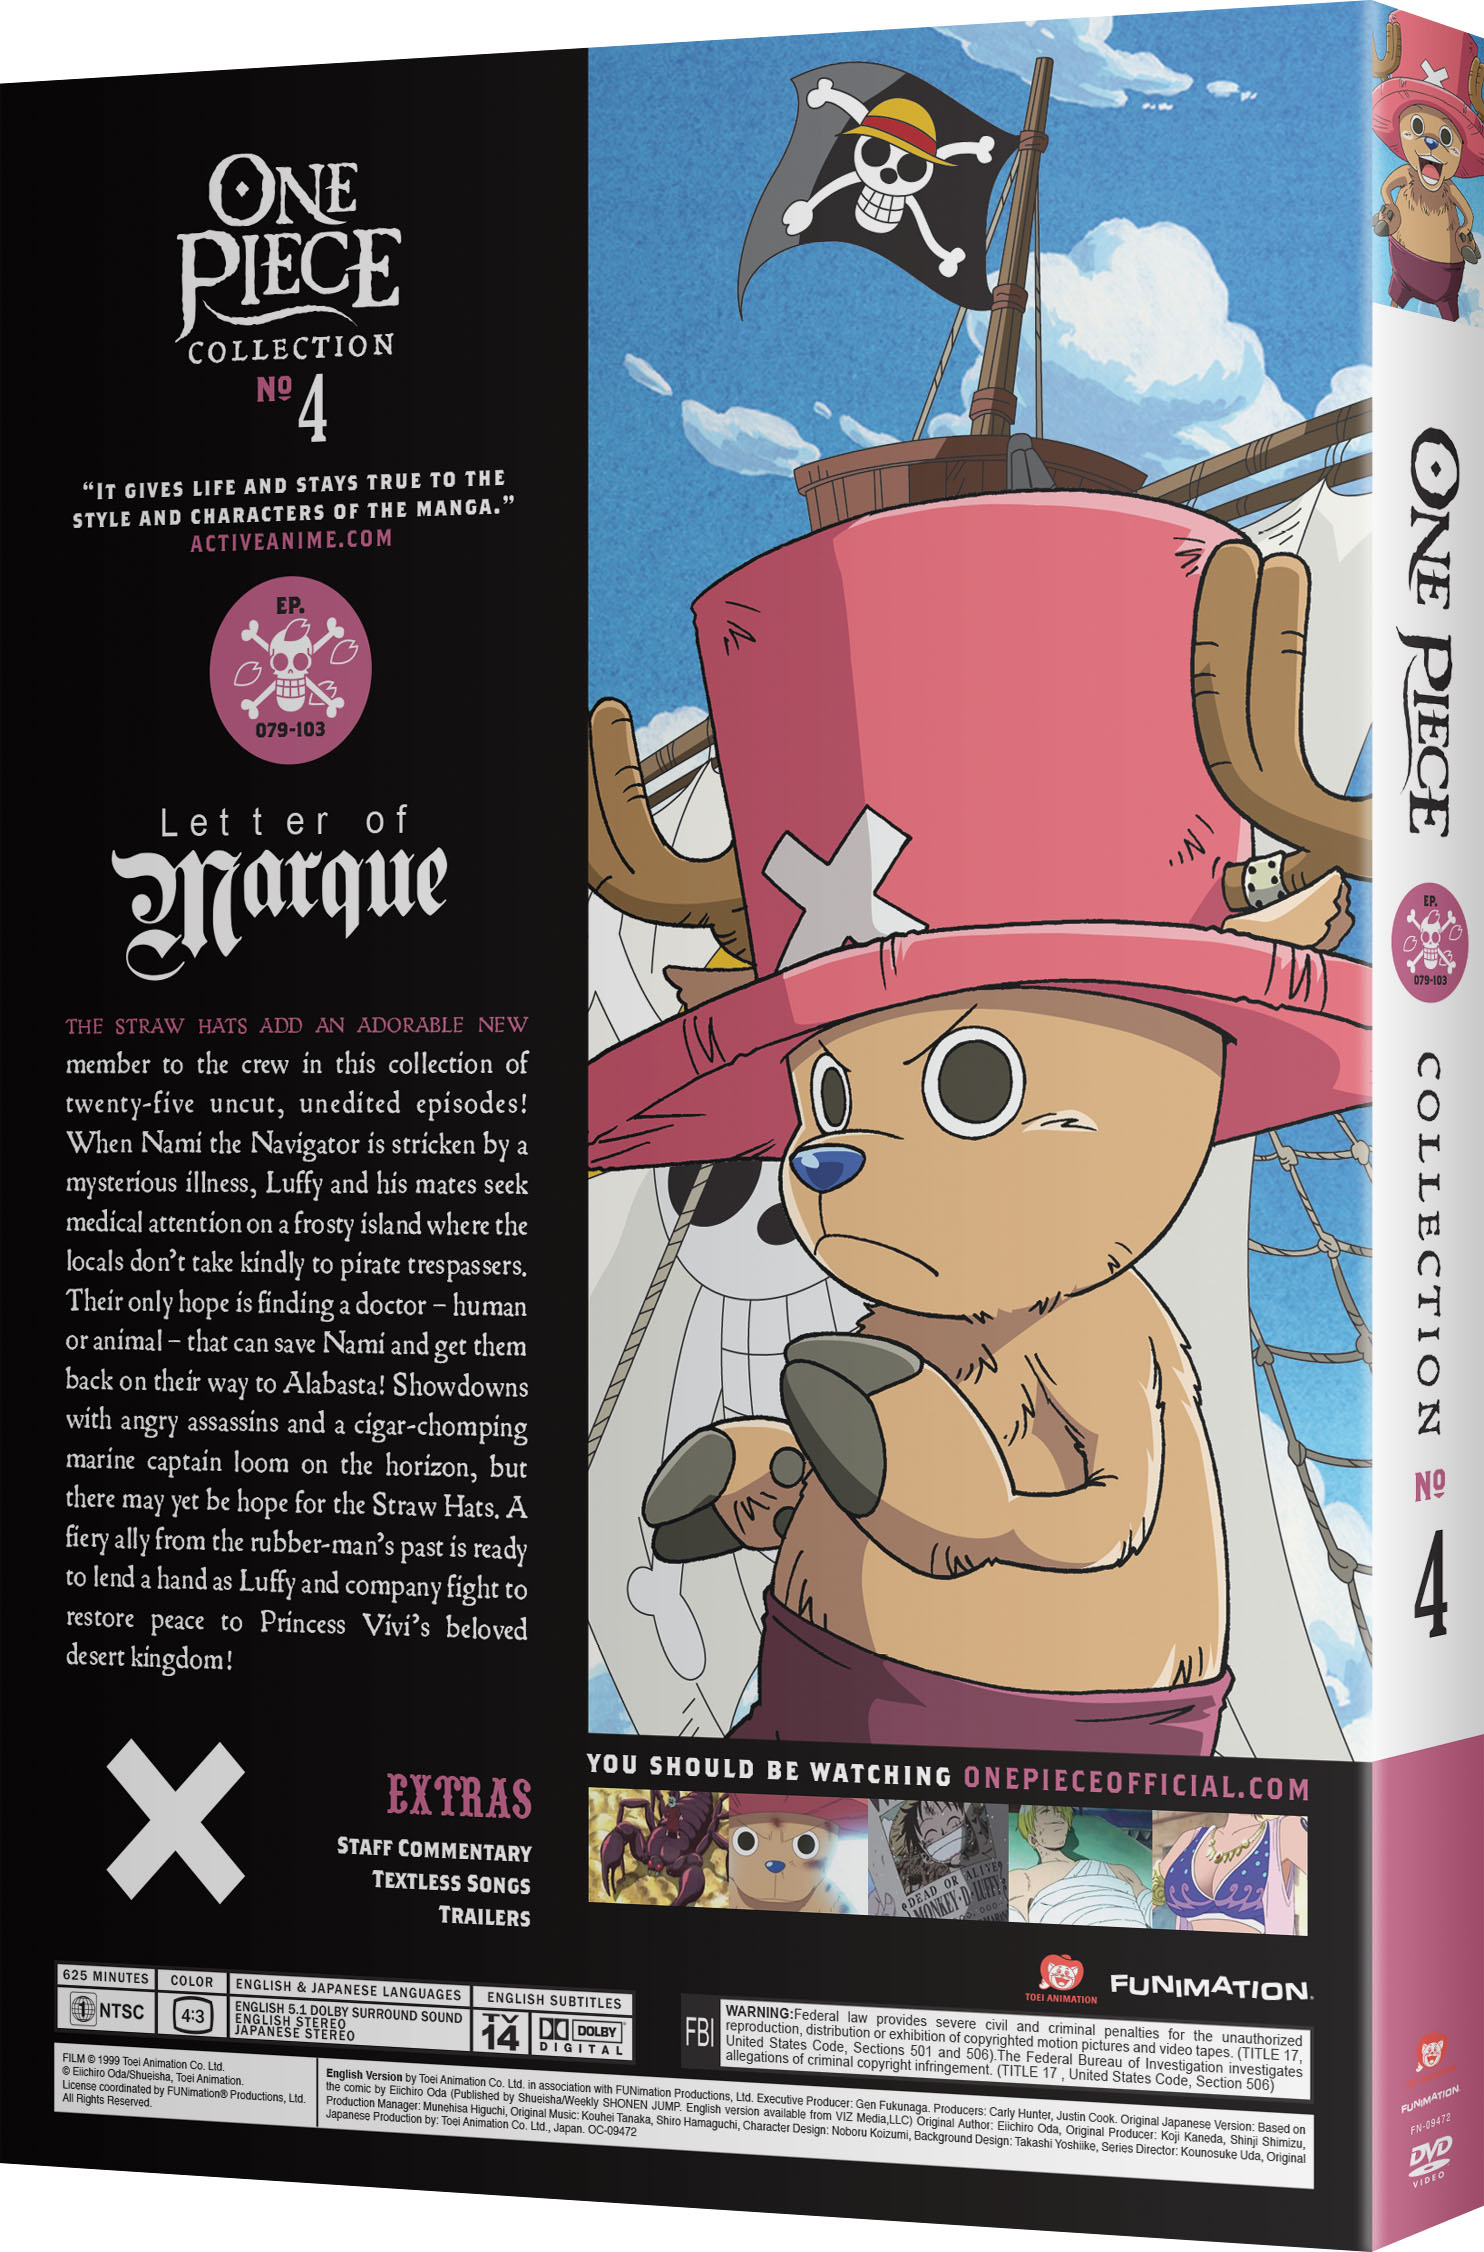 one-piece-collection-4-dvd image count 1